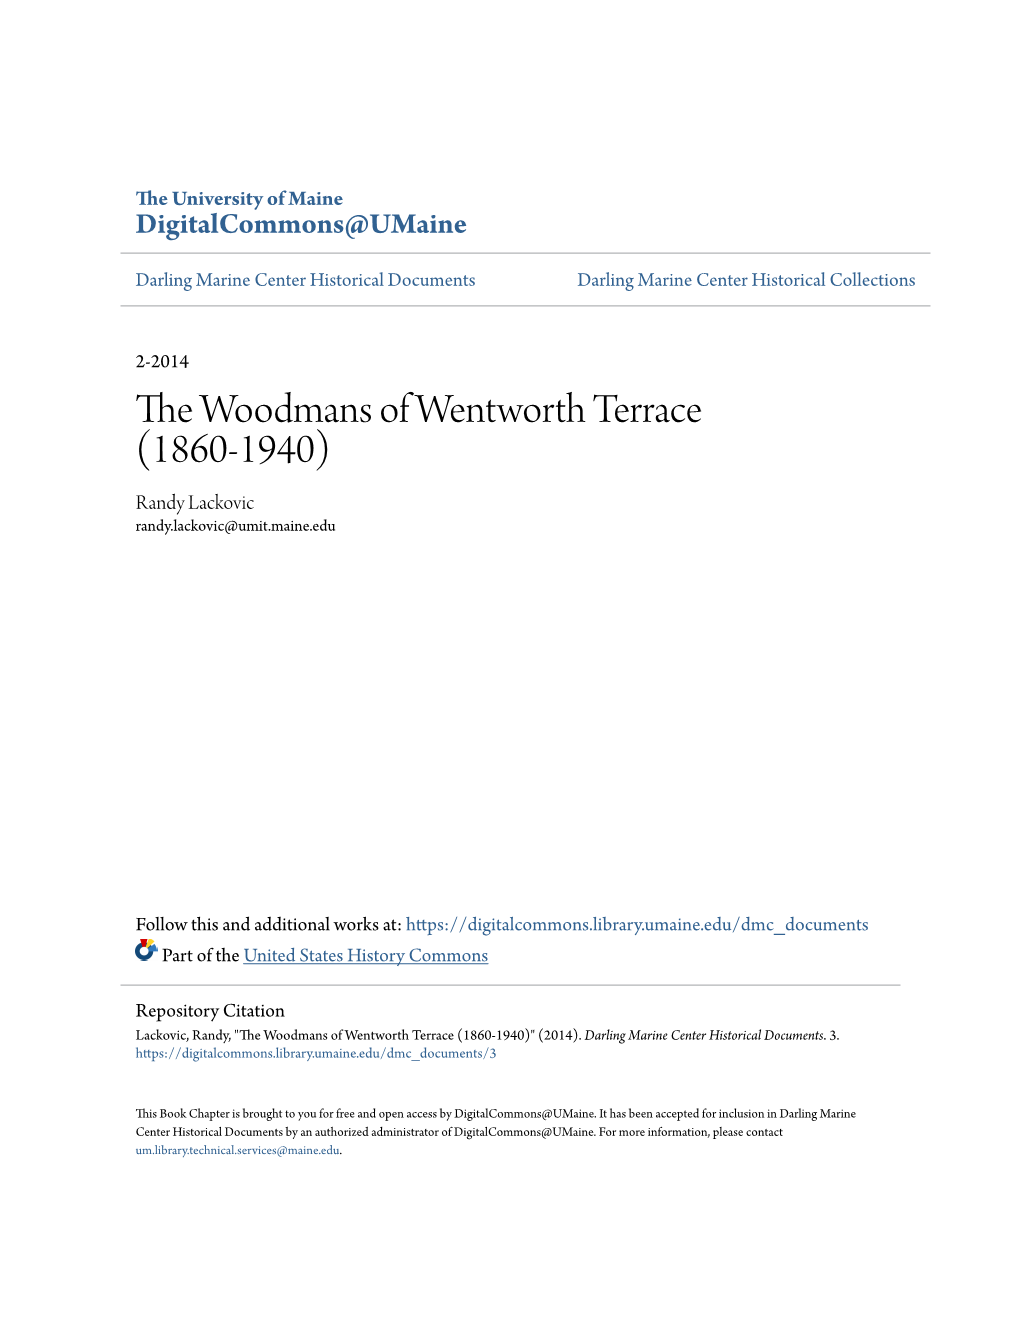 The Woodmans of Wentworth Terrace (1860-1940)